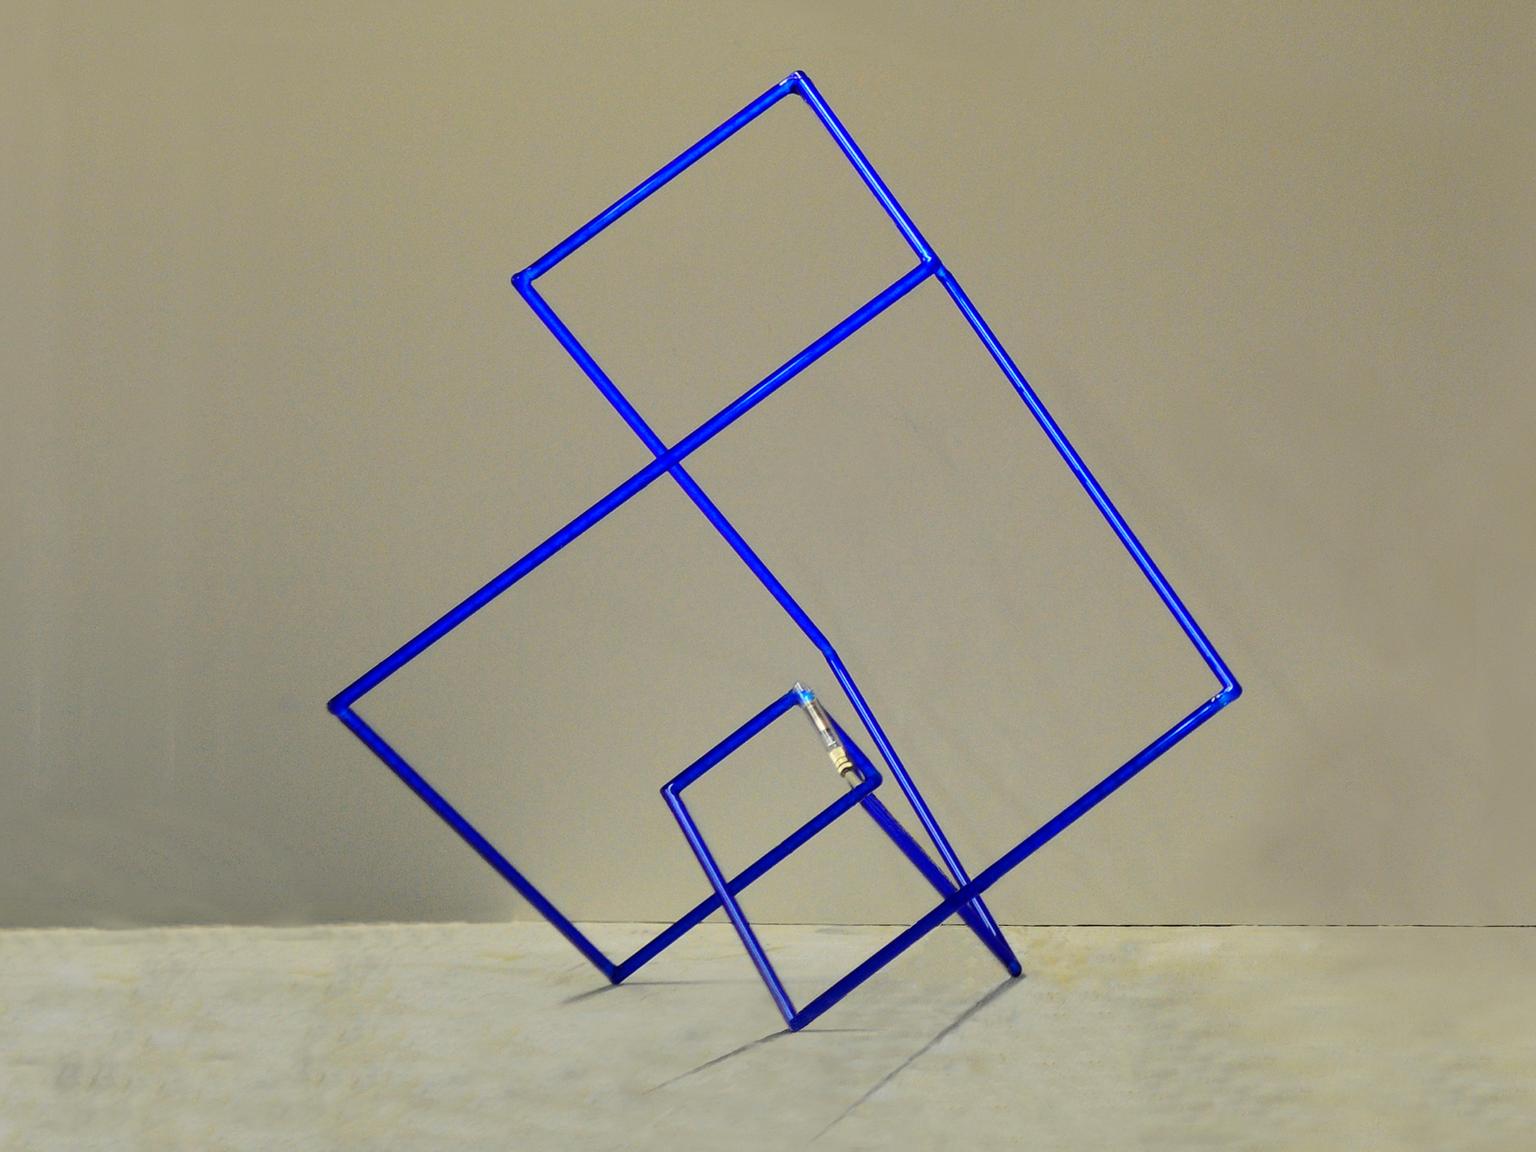 Image for entry 'Blue Boy's Cube'